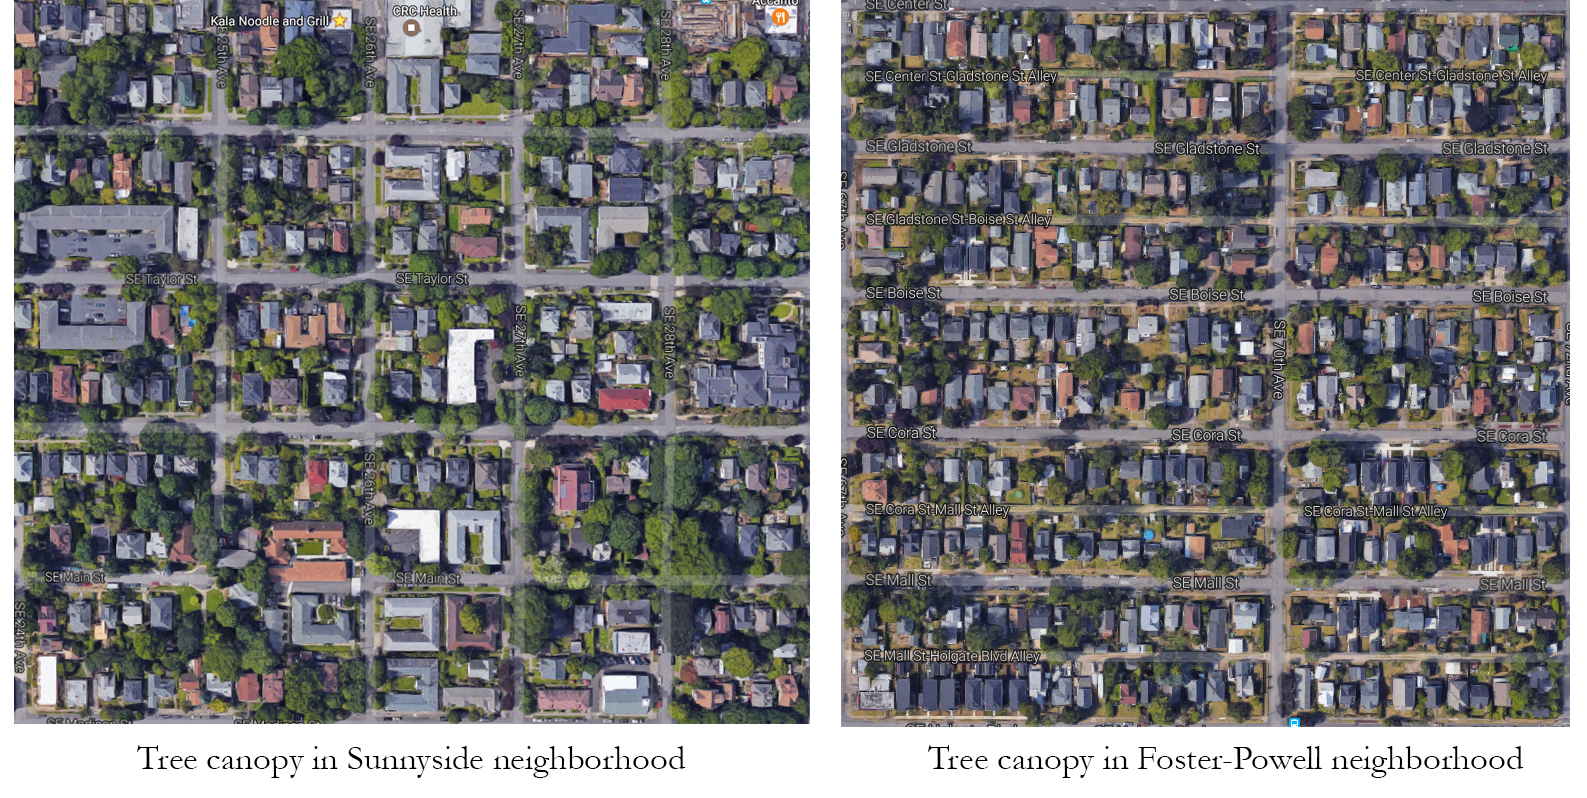 Difference of tree canopy in high- and low-income neighborhoods